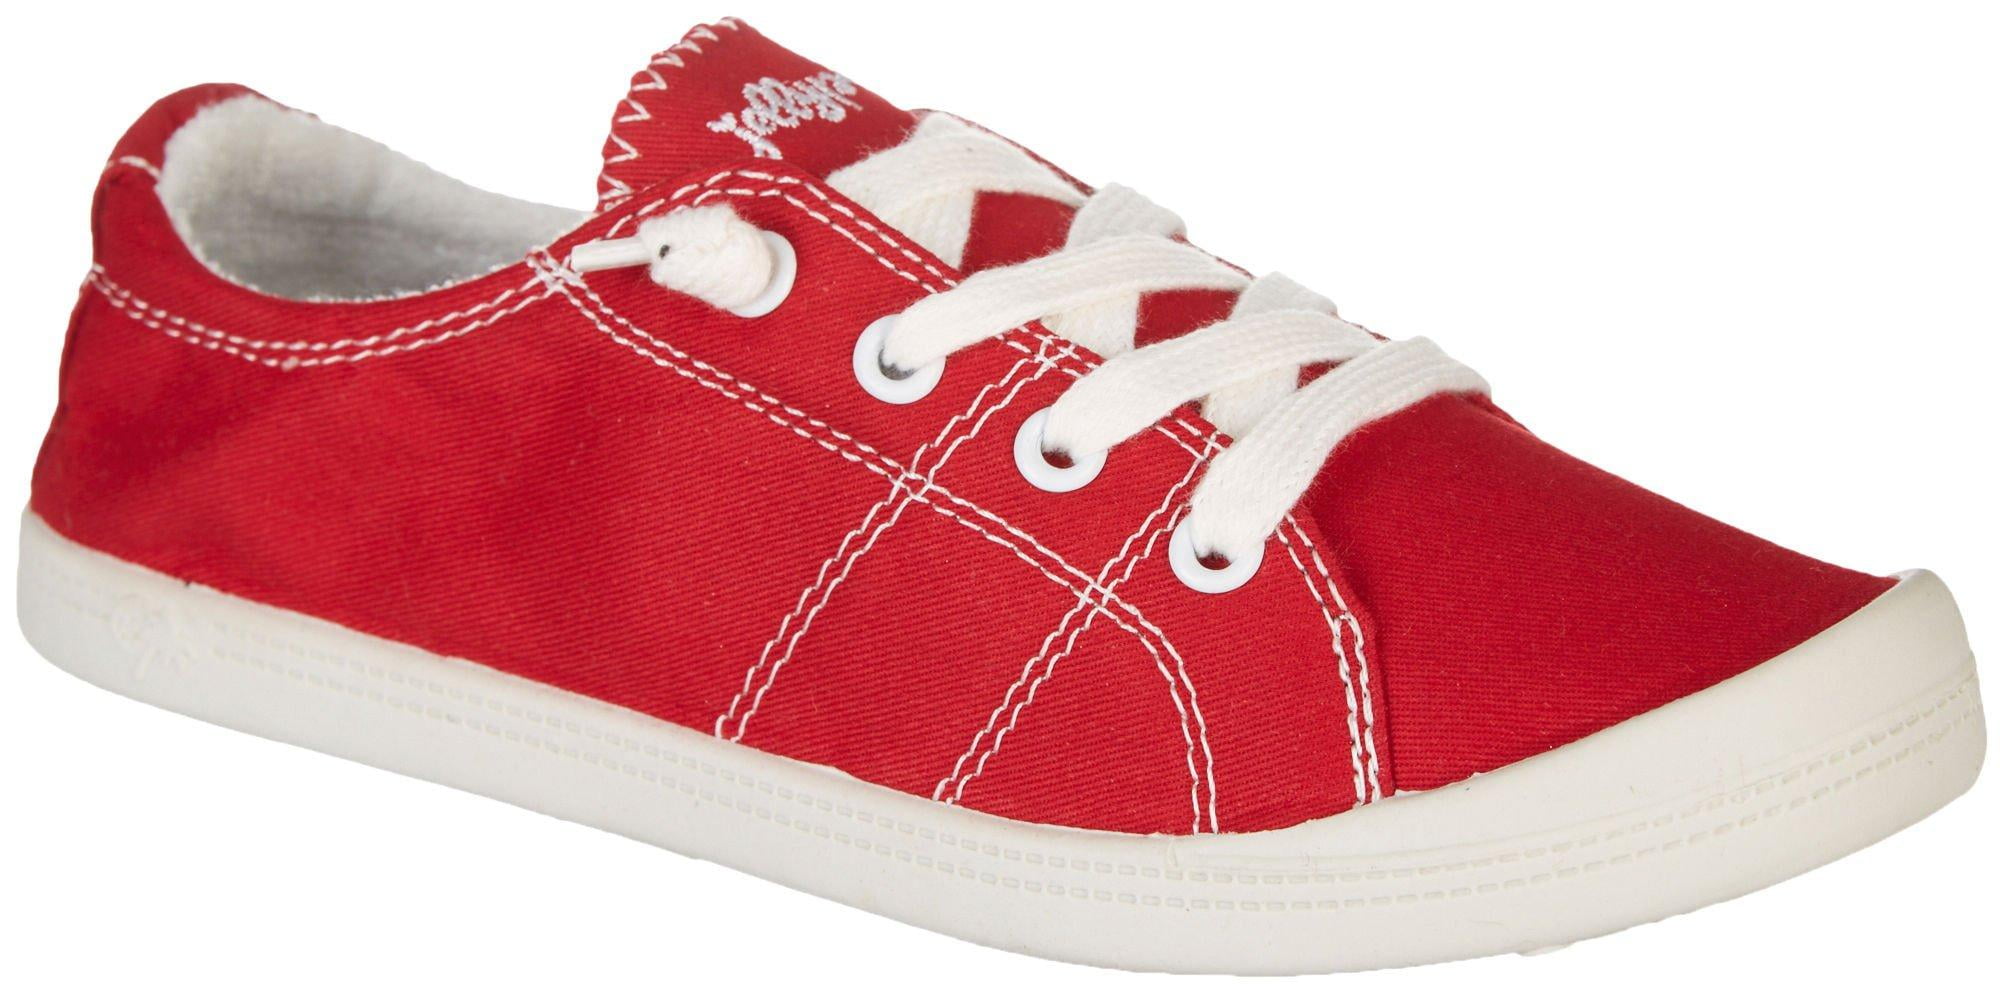 red jellypop sneakers